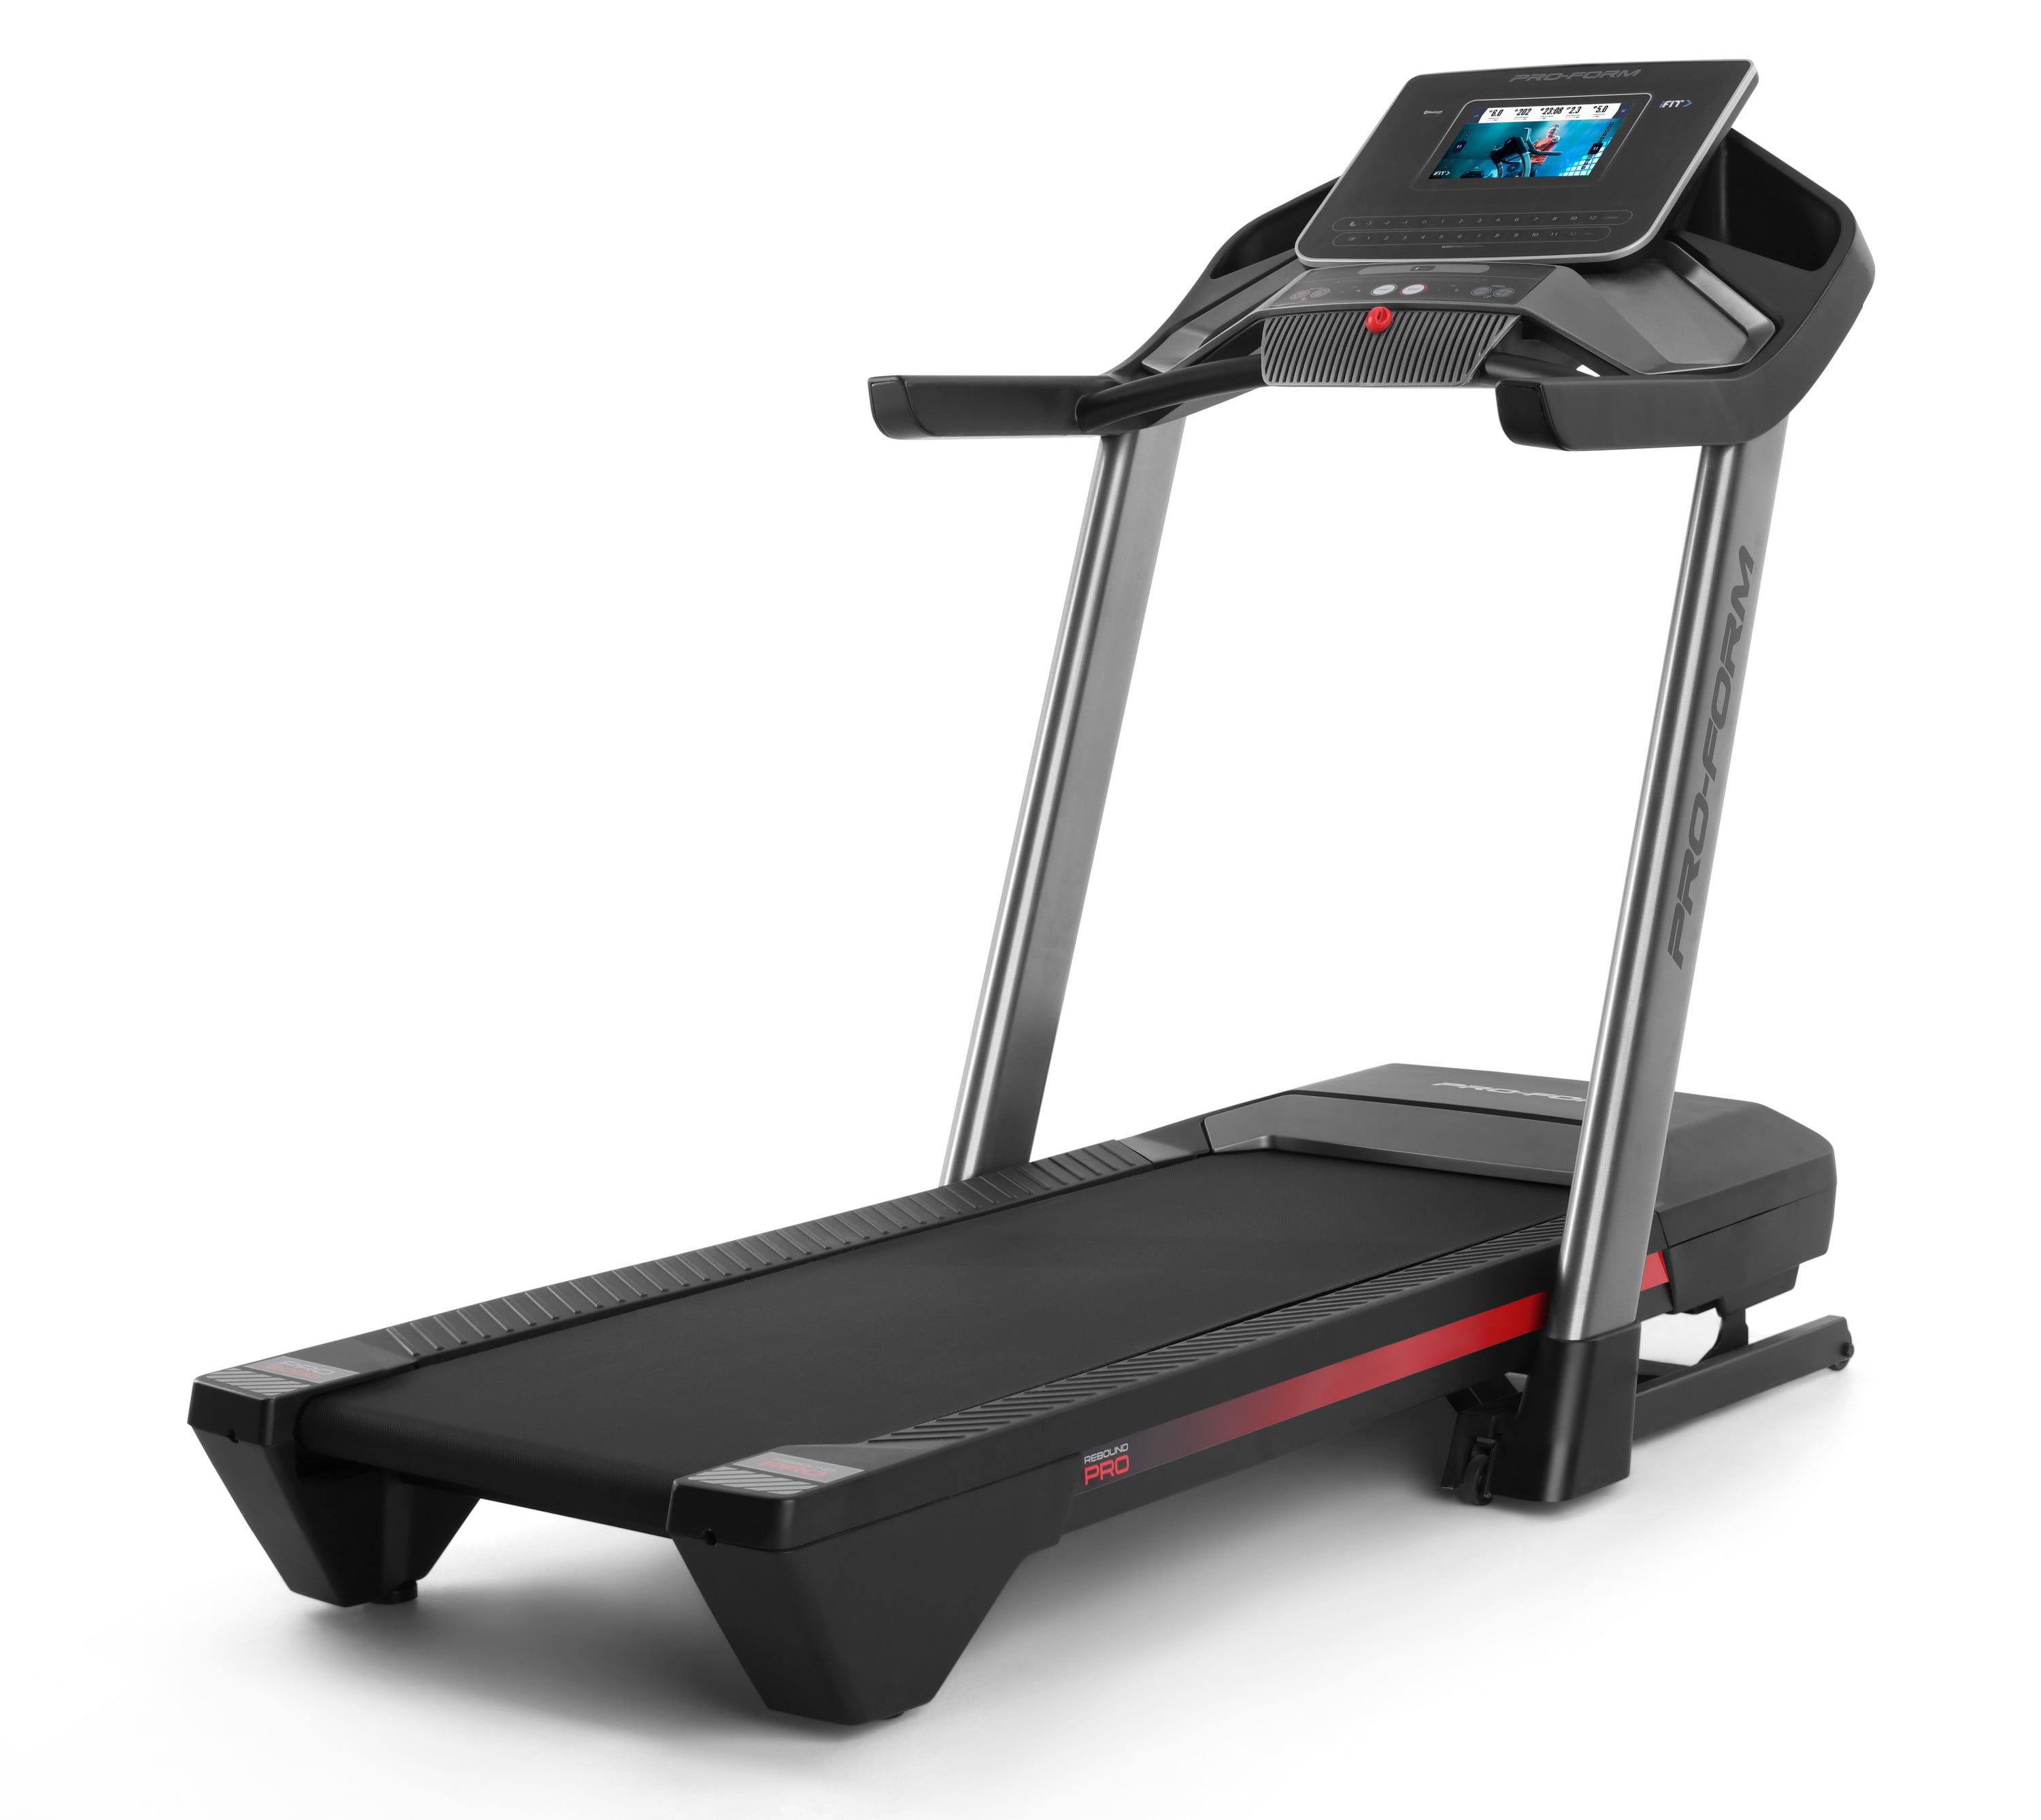 Pro 2000 Smart Treadmill with 10” Touchscreen